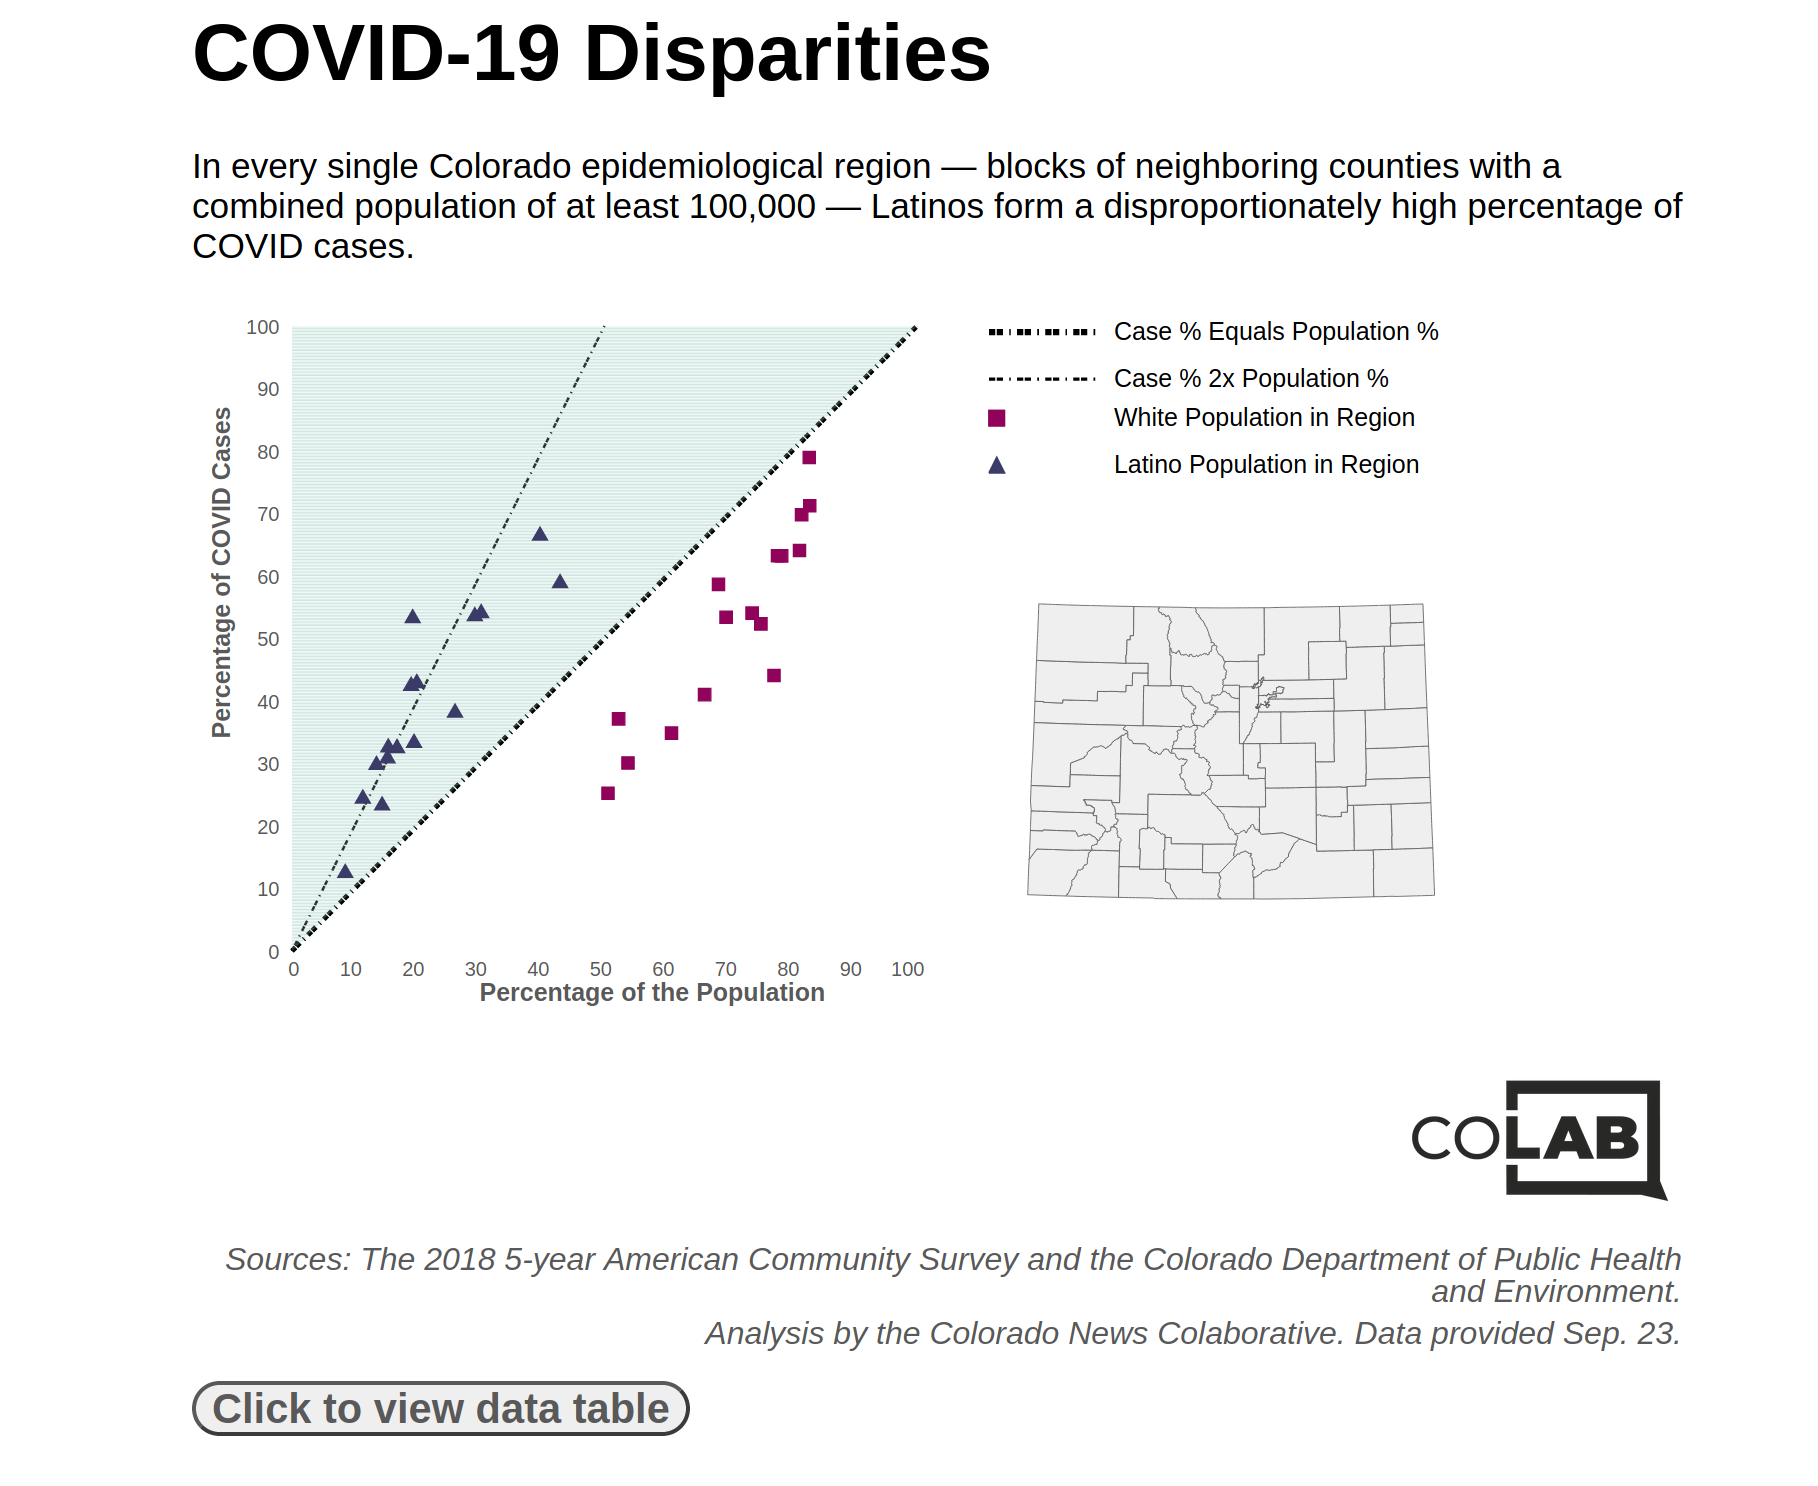 Graphic showing that Latinos form a disproportionate percentage of COVID-19 cases in every corner of Colorado.